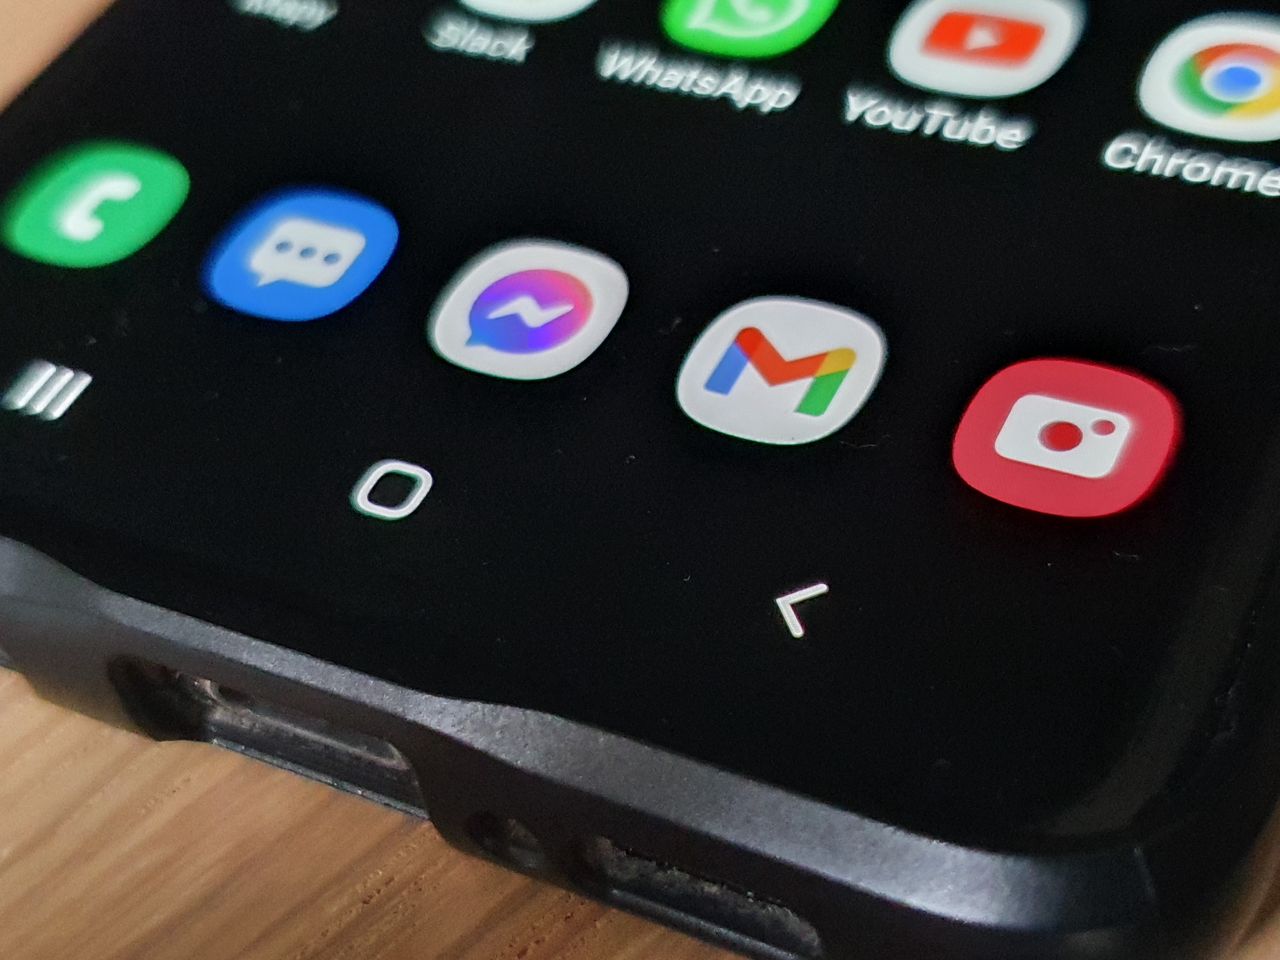 Critical flaw in Android: Google has patched it, but this is only half of the story